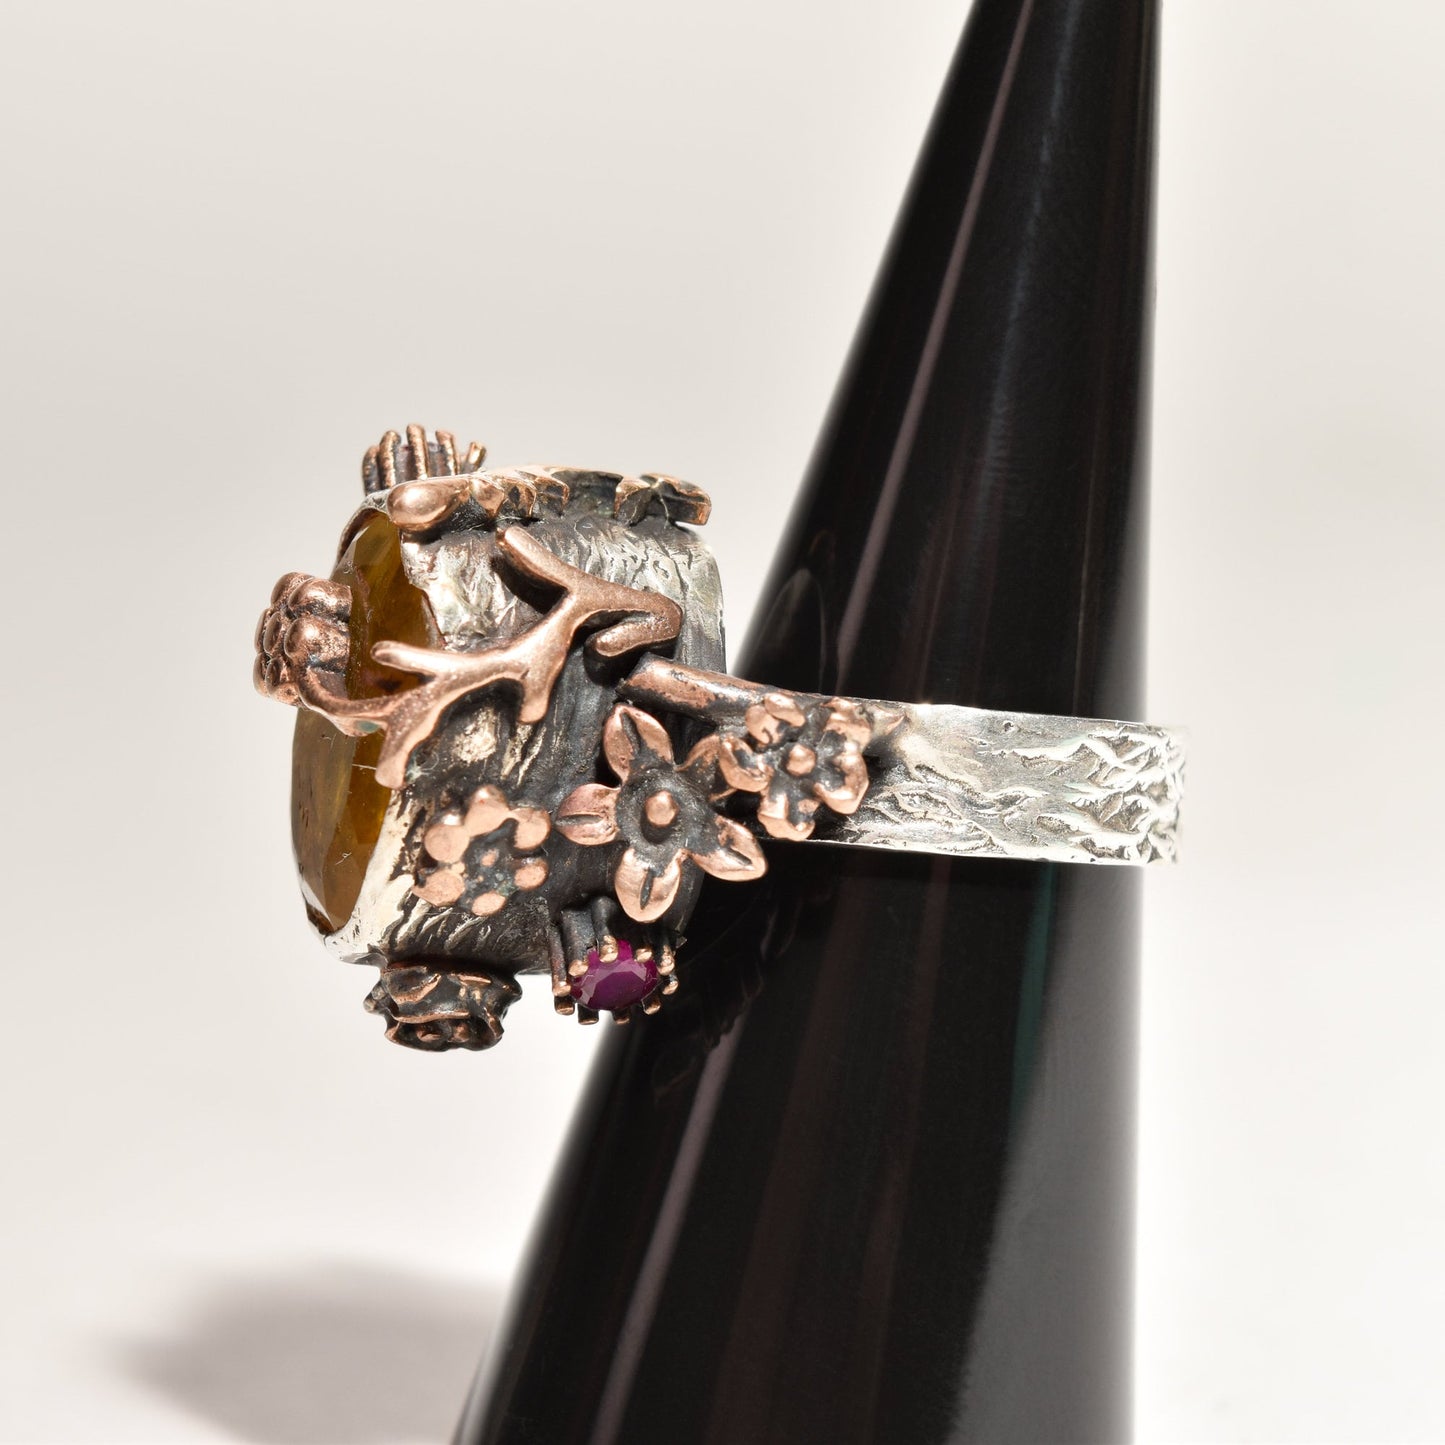 Brutalist sterling silver citrine ruby flower ring on display, two-tone statement piece size 6.25 US, showcasing intricate metalwork and gemstones.